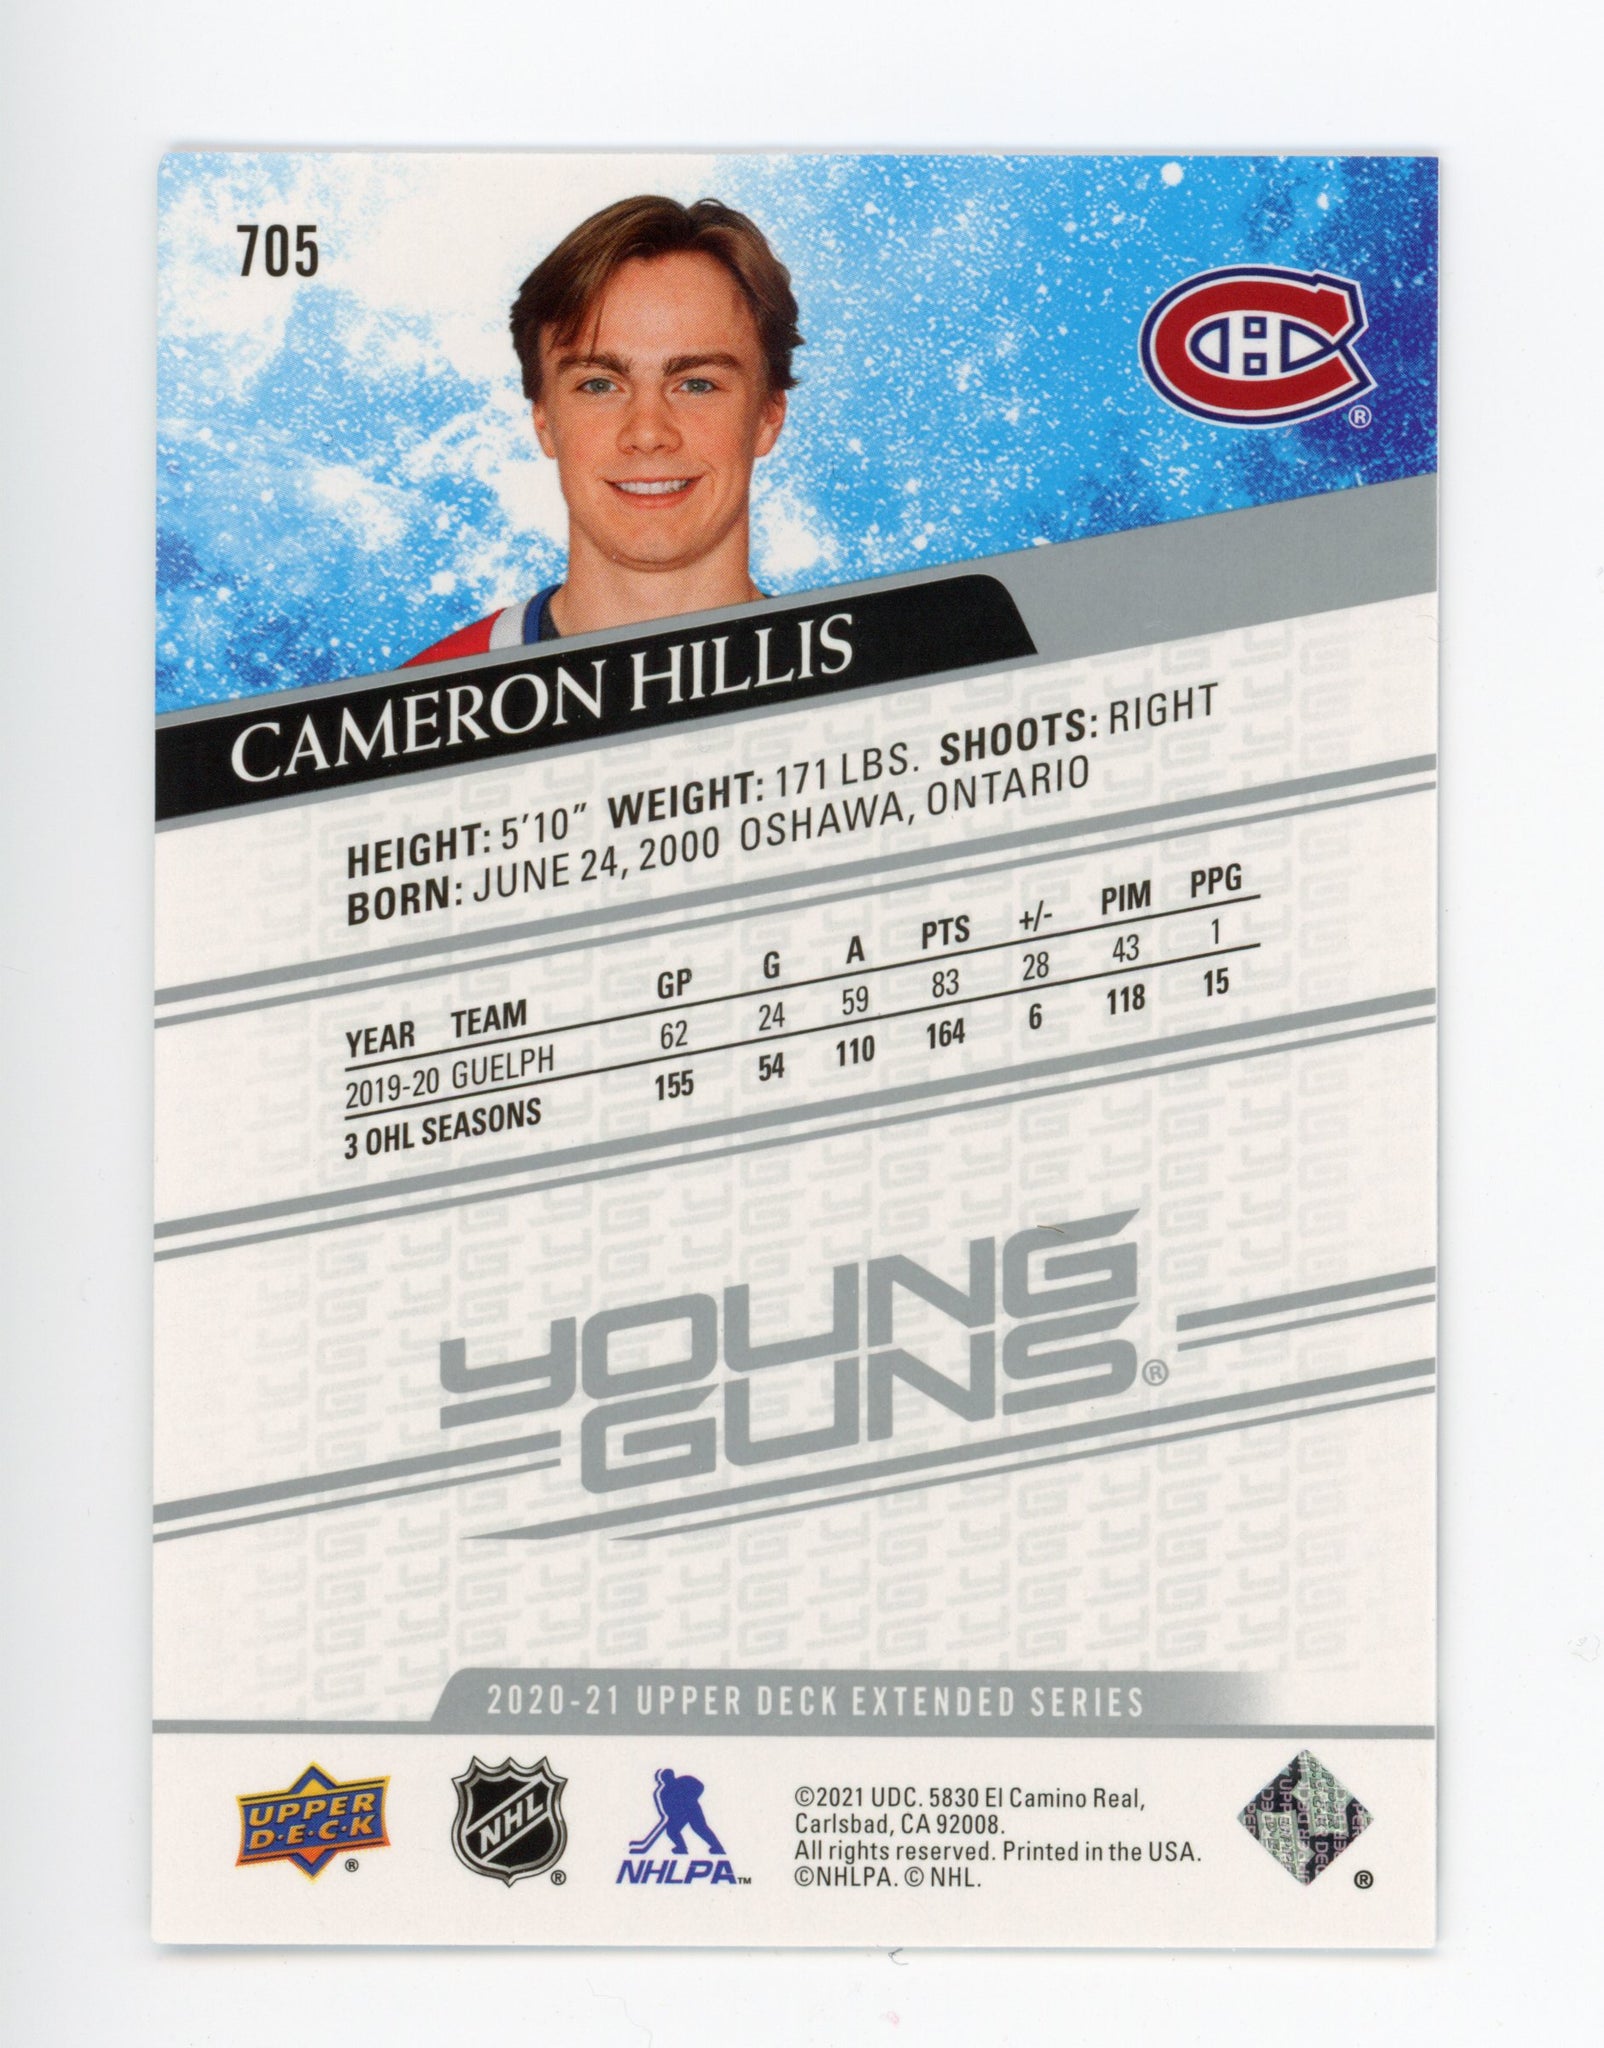 2020-2021 Cameron Hillis Young Guns Upper Deck Extended Series Montreal Canadiens # 705